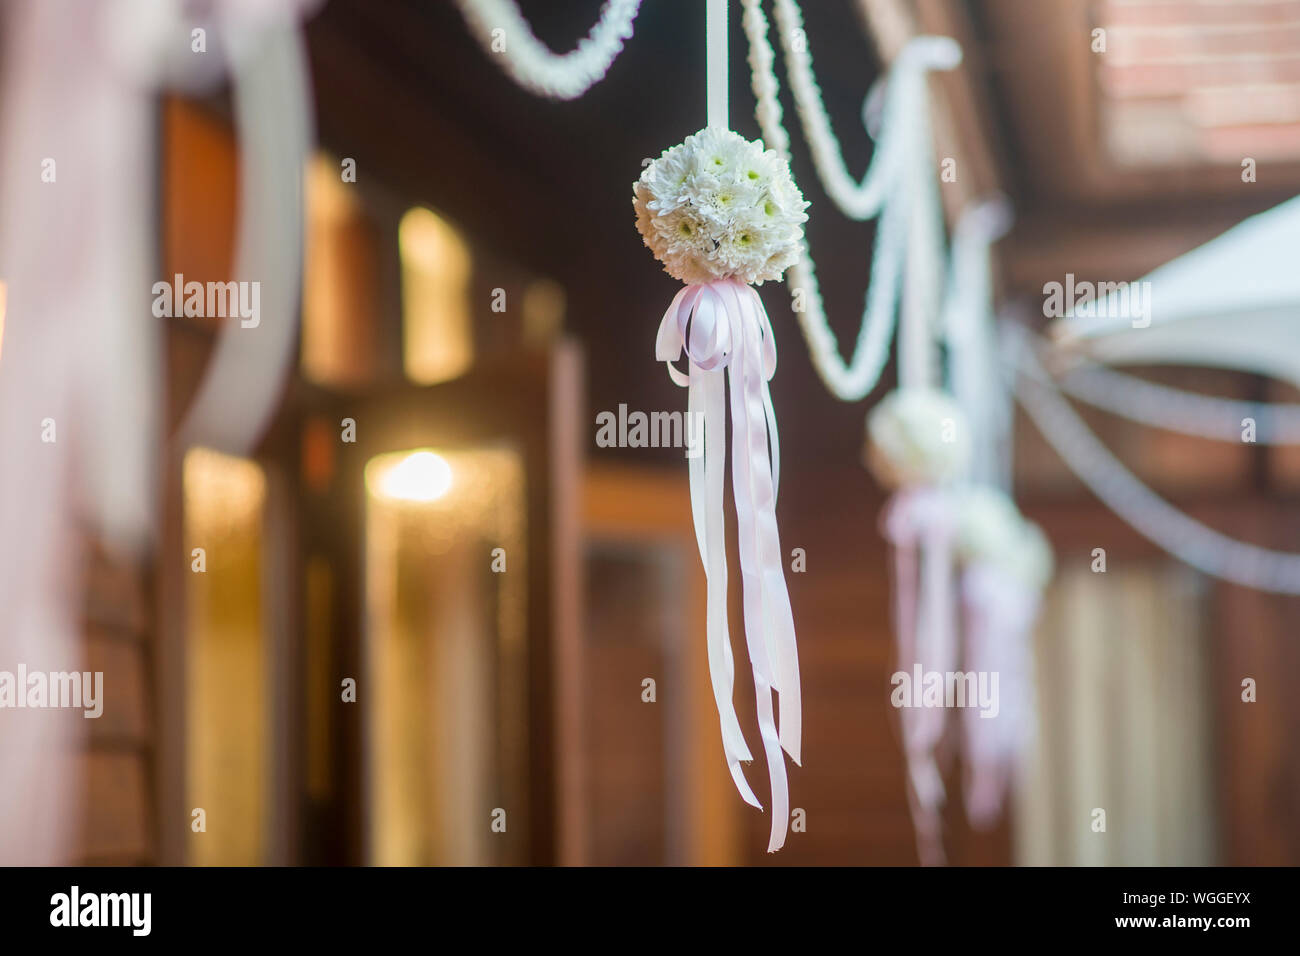 Low Angle View Of Decoration During Wedding Ceremony Stock Photo